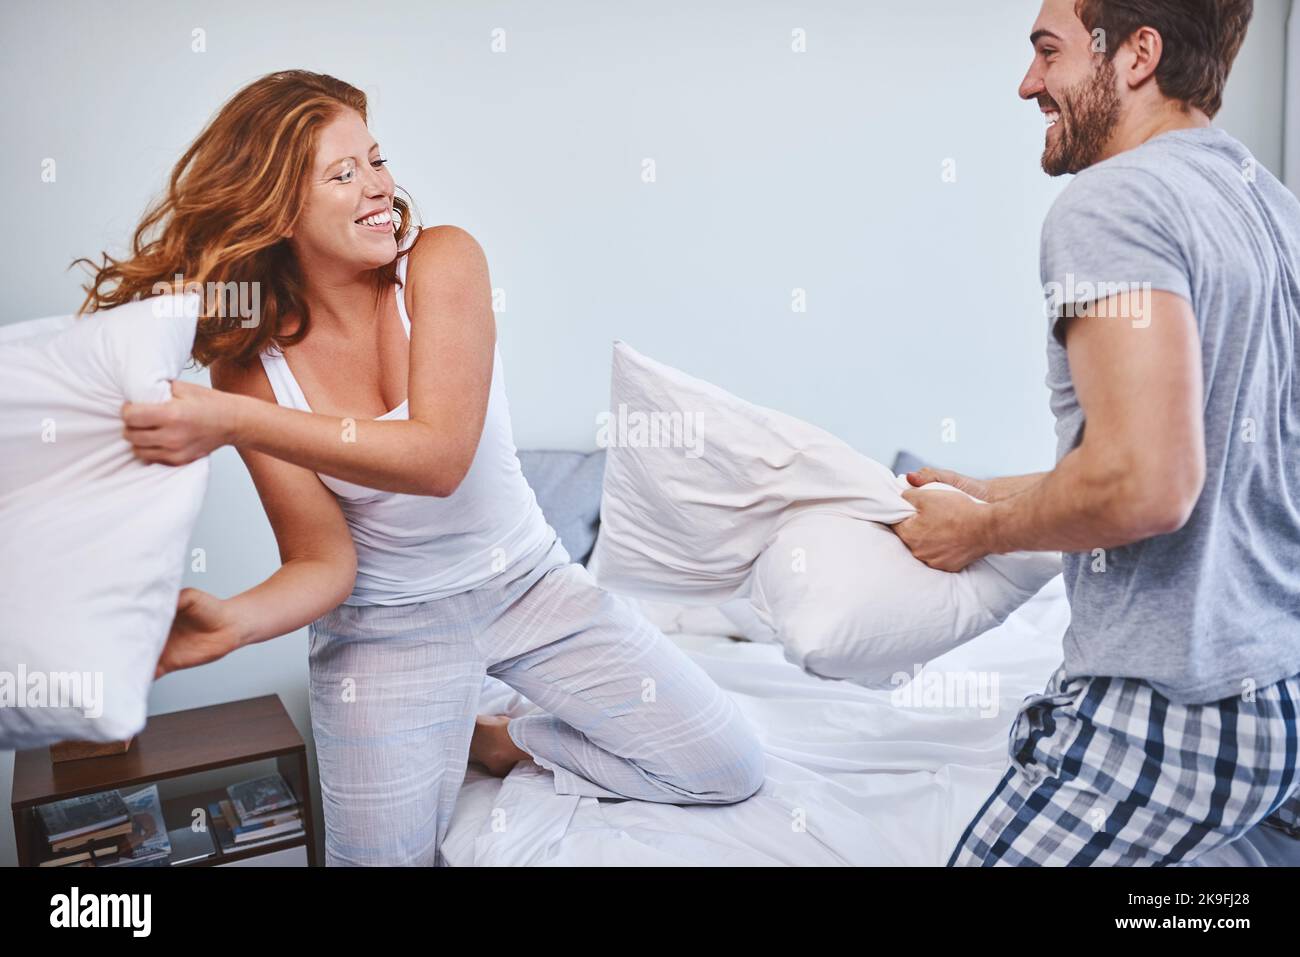 Theyre in a playful mood this morning. a couple having a pillow fight at home. Stock Photo